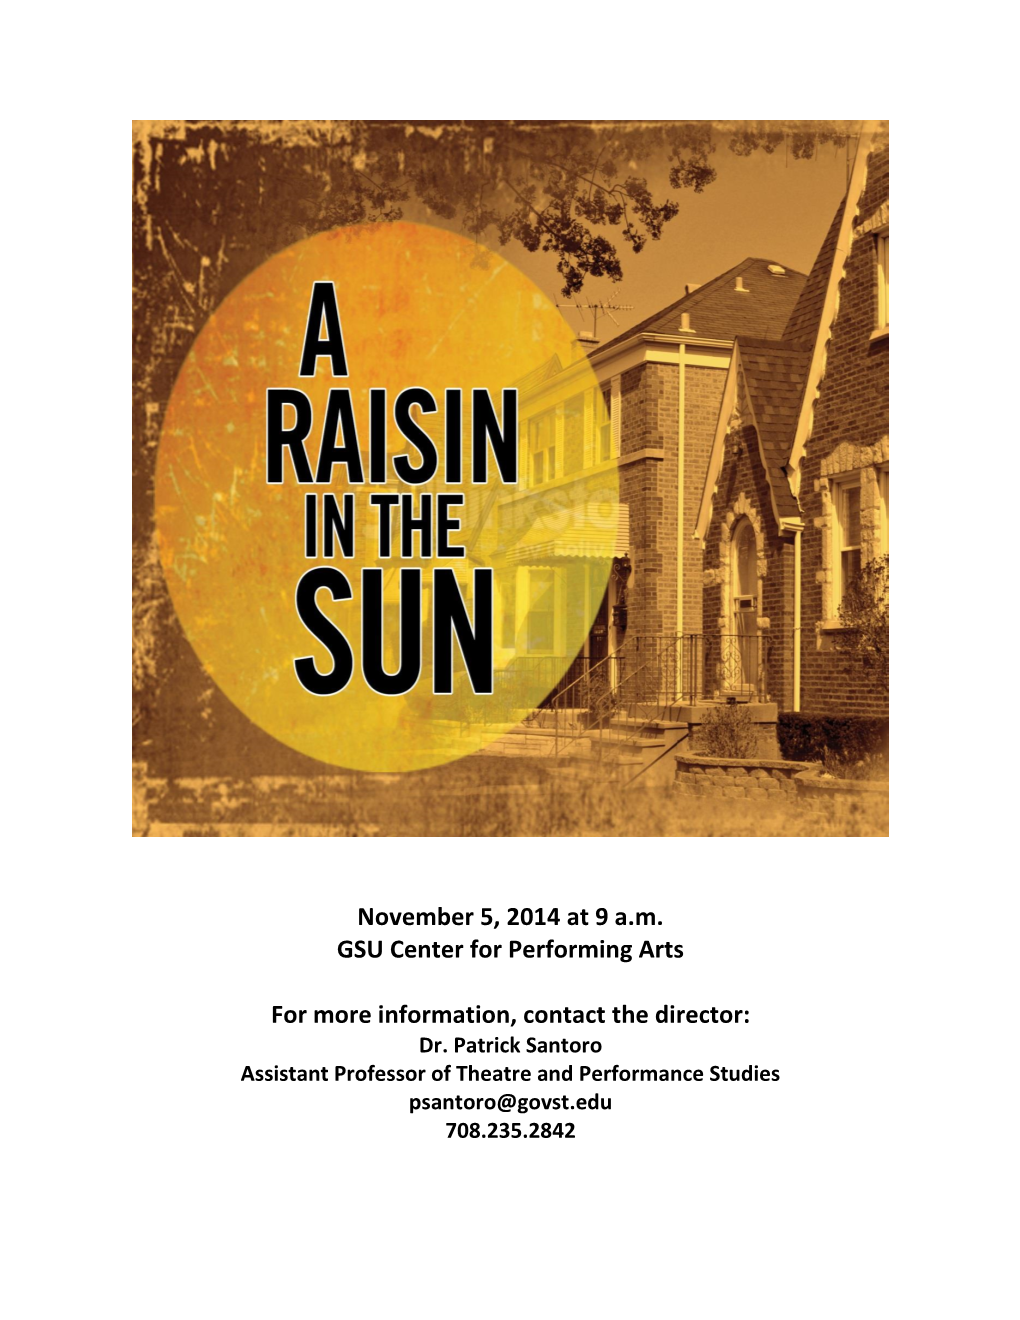 November 5, 2014 at 9 A.M. GSU Center for Performing Arts for More